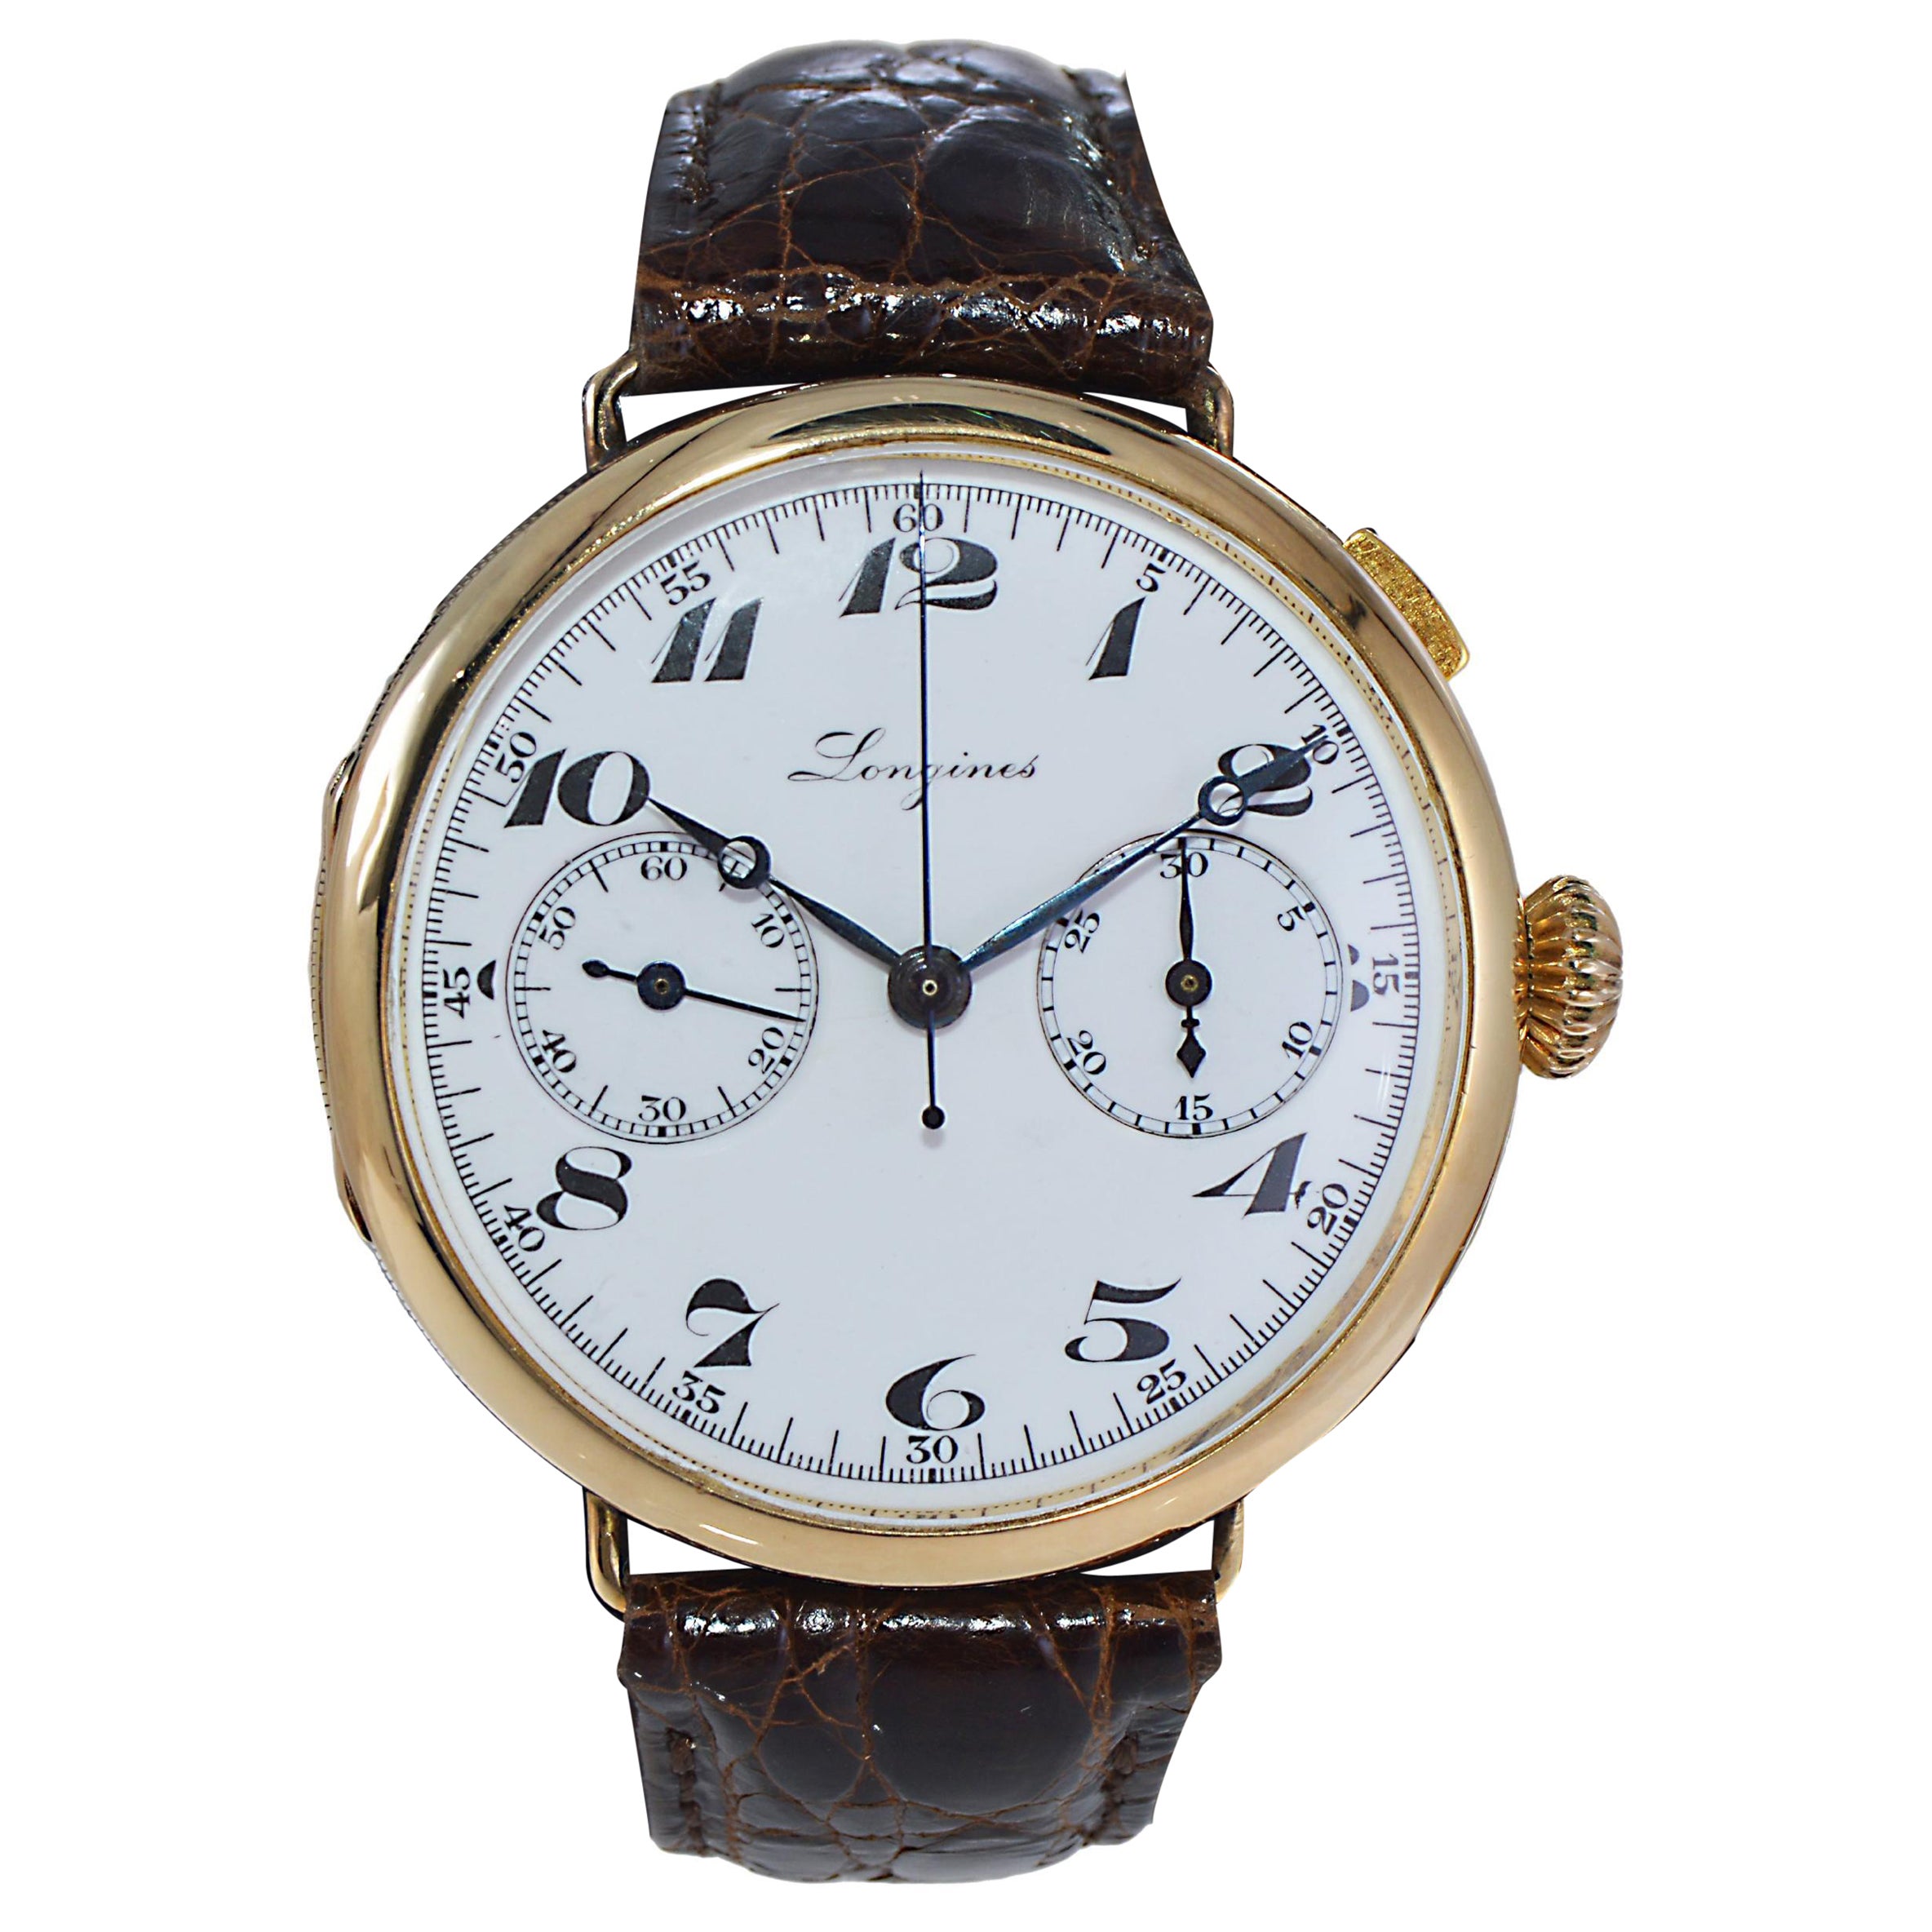 Longines Yellow Gold Enamel Dial Military Chronograph Manual Watch from 1933